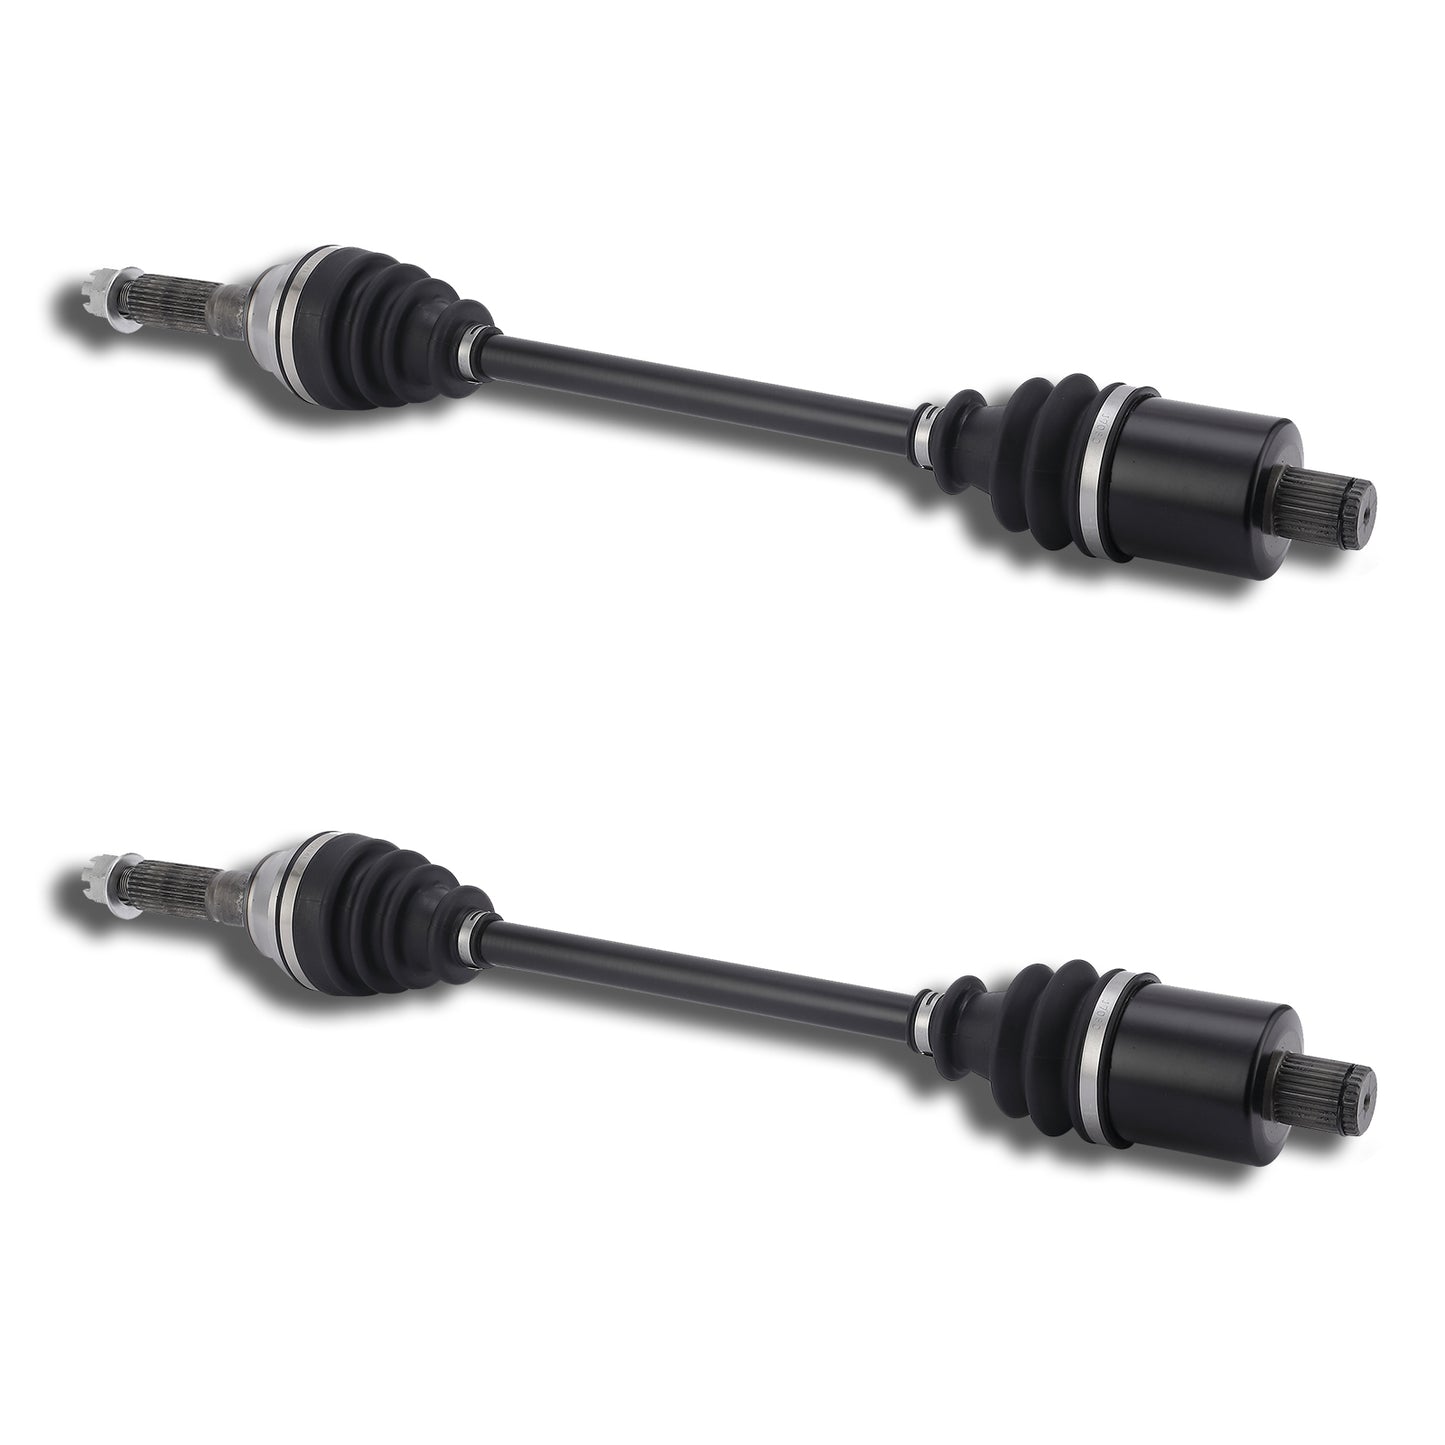 2 CAM-PO342 Rear Left Drive Shaft CV Axle for POLARIS (2010-2014) Sportsman 550 BR / (2010-2019) Sportsman 850 BR / (2016-2019) Sportsman 1000 BR